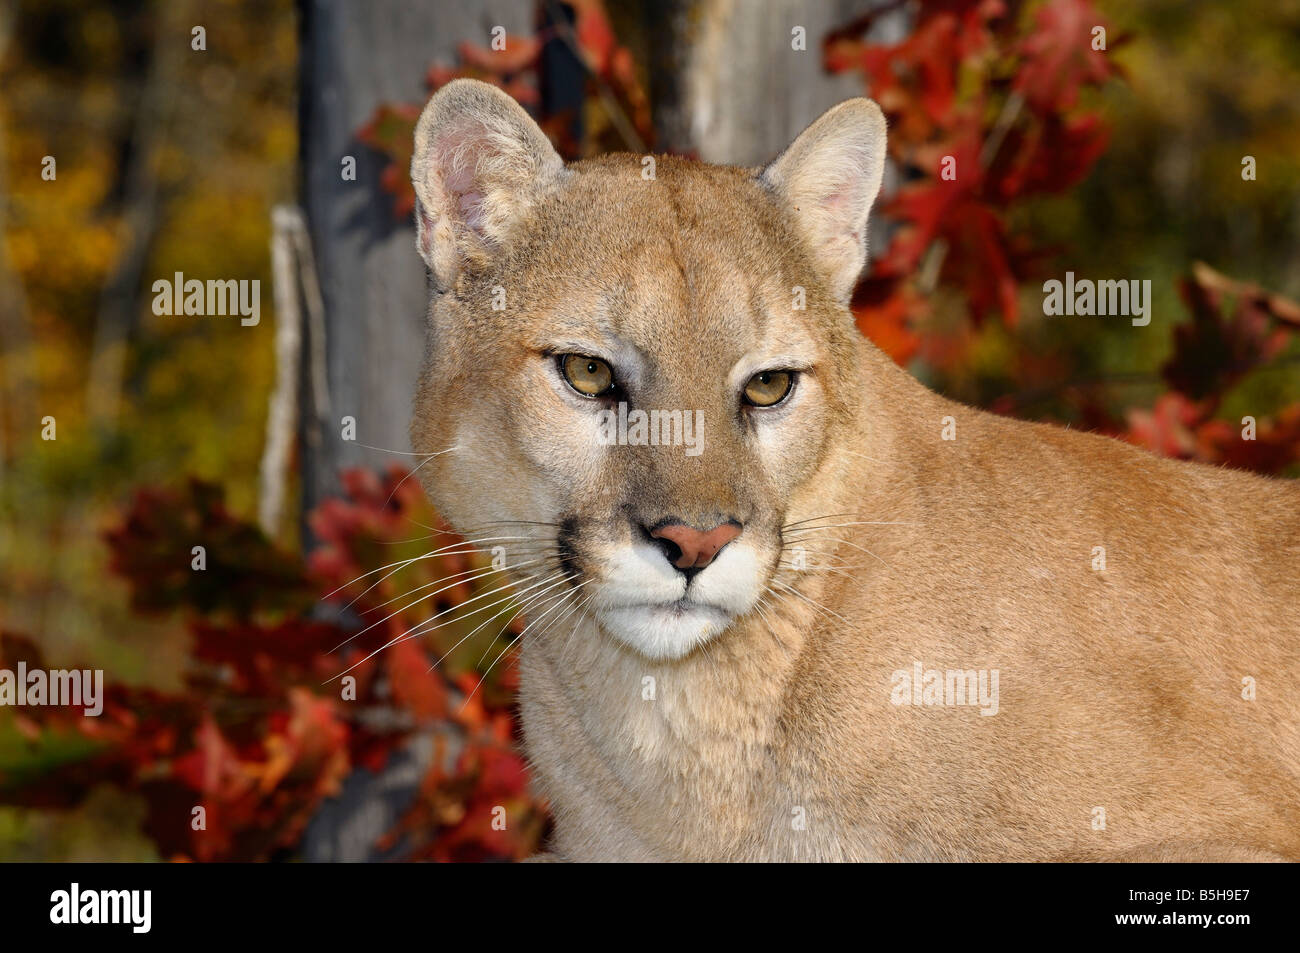 Close up of a Cougar face in an Autumn forest with red oak leaves Mountain lion Puma concolor Minnesota USA Stock Photo